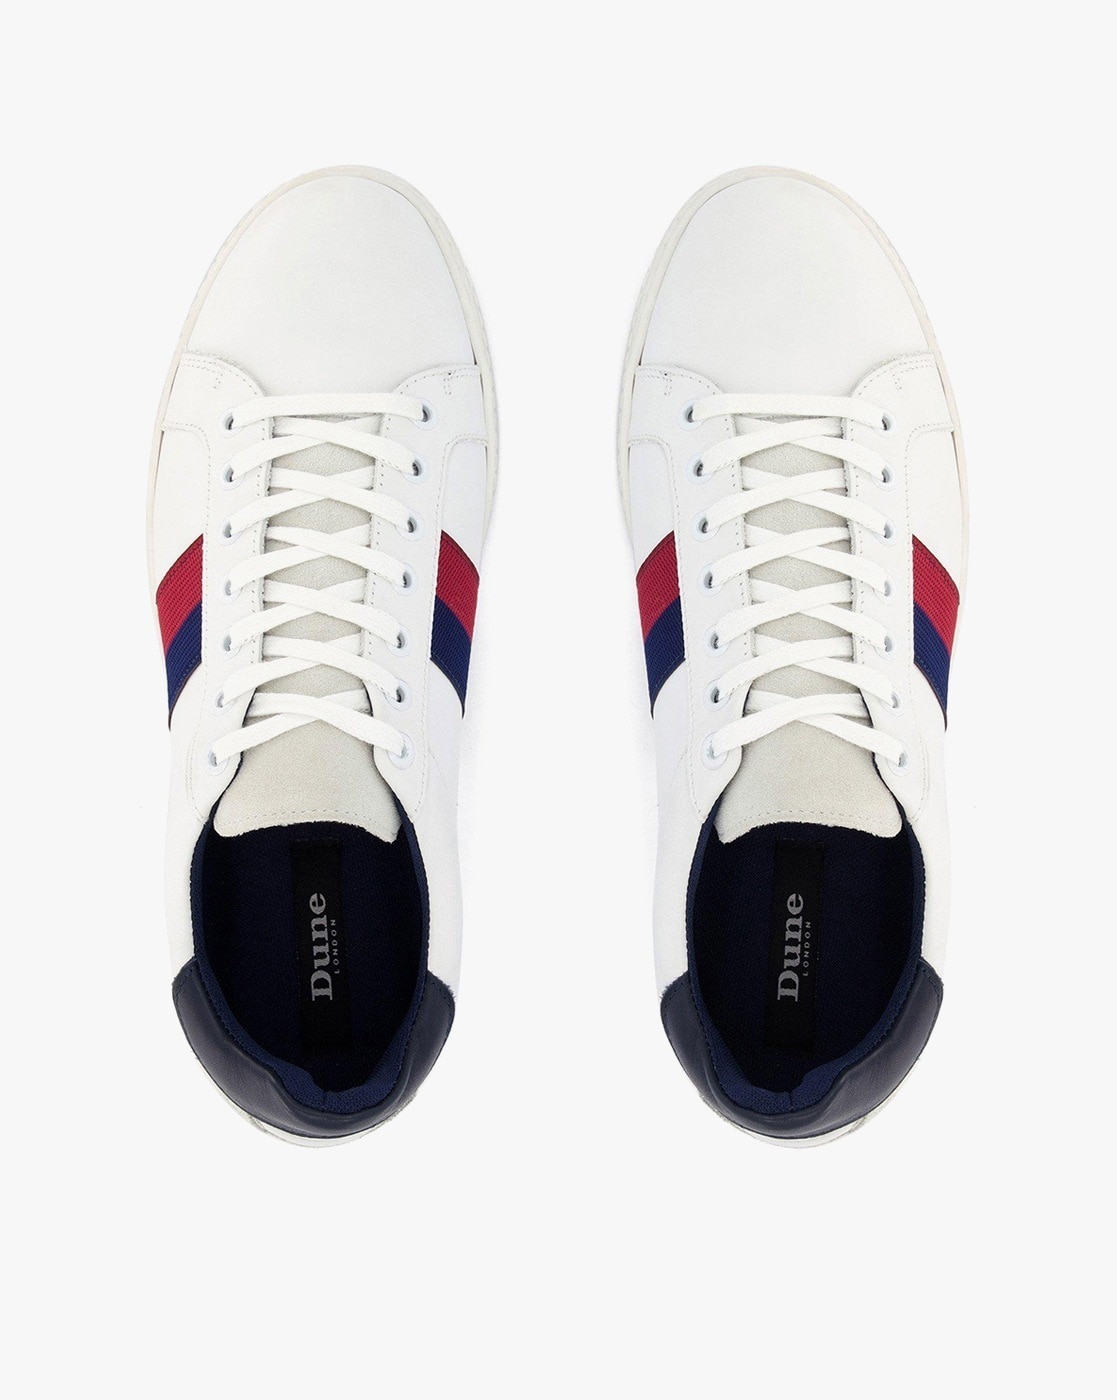 Dune London Excited Trainers | SportsDirect.com USA